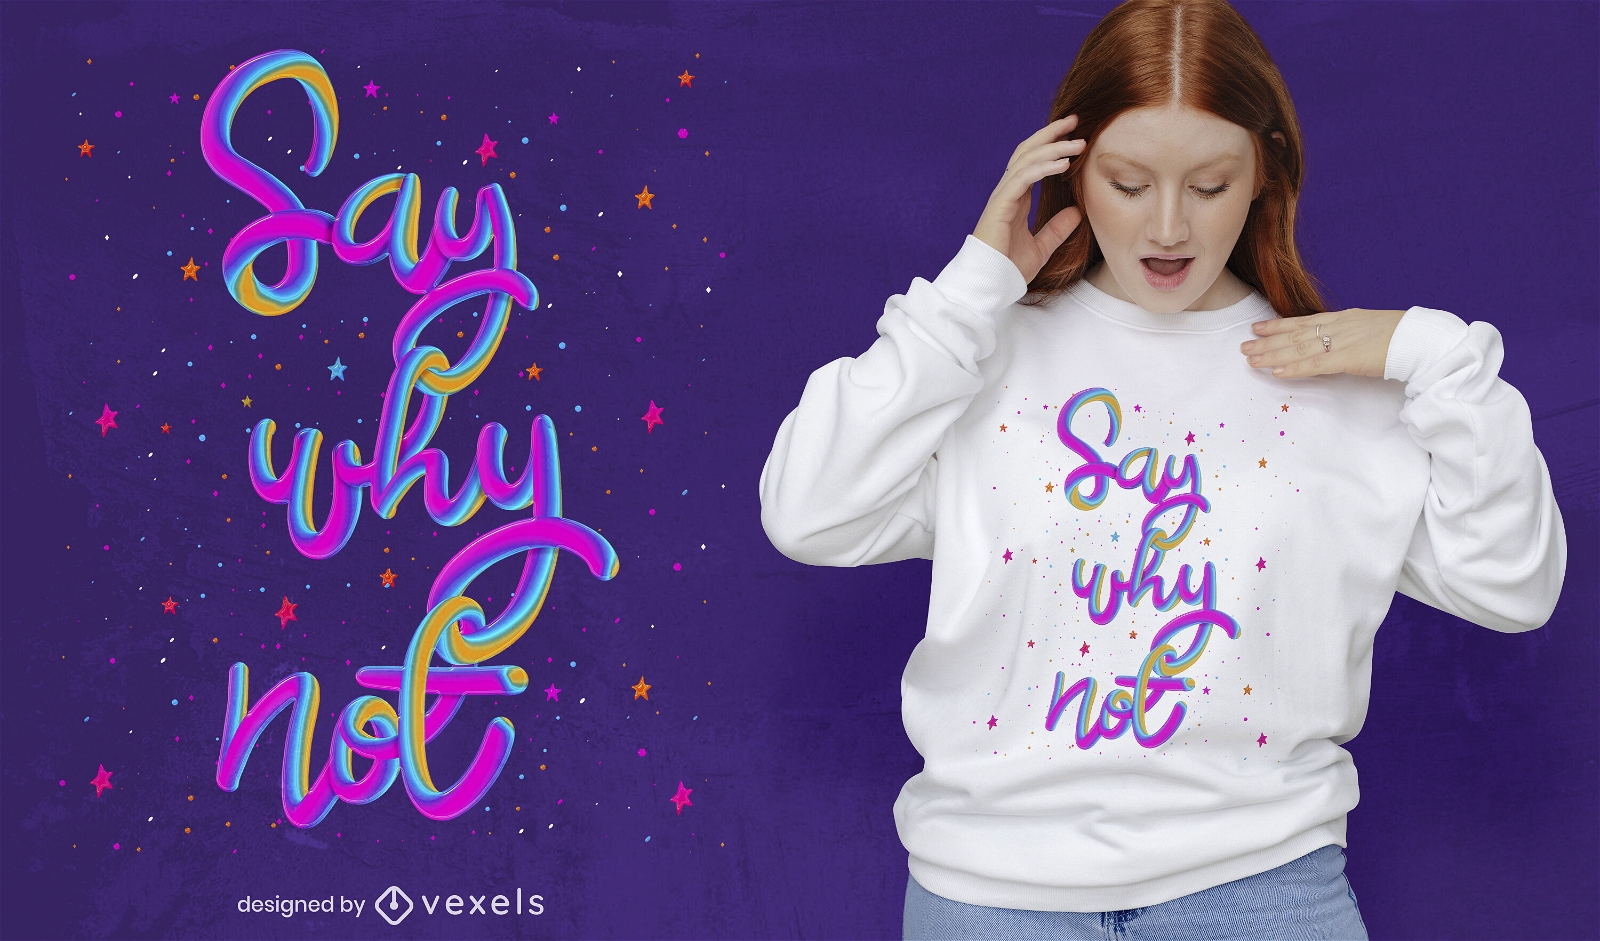 Say why noy t-shirt psd